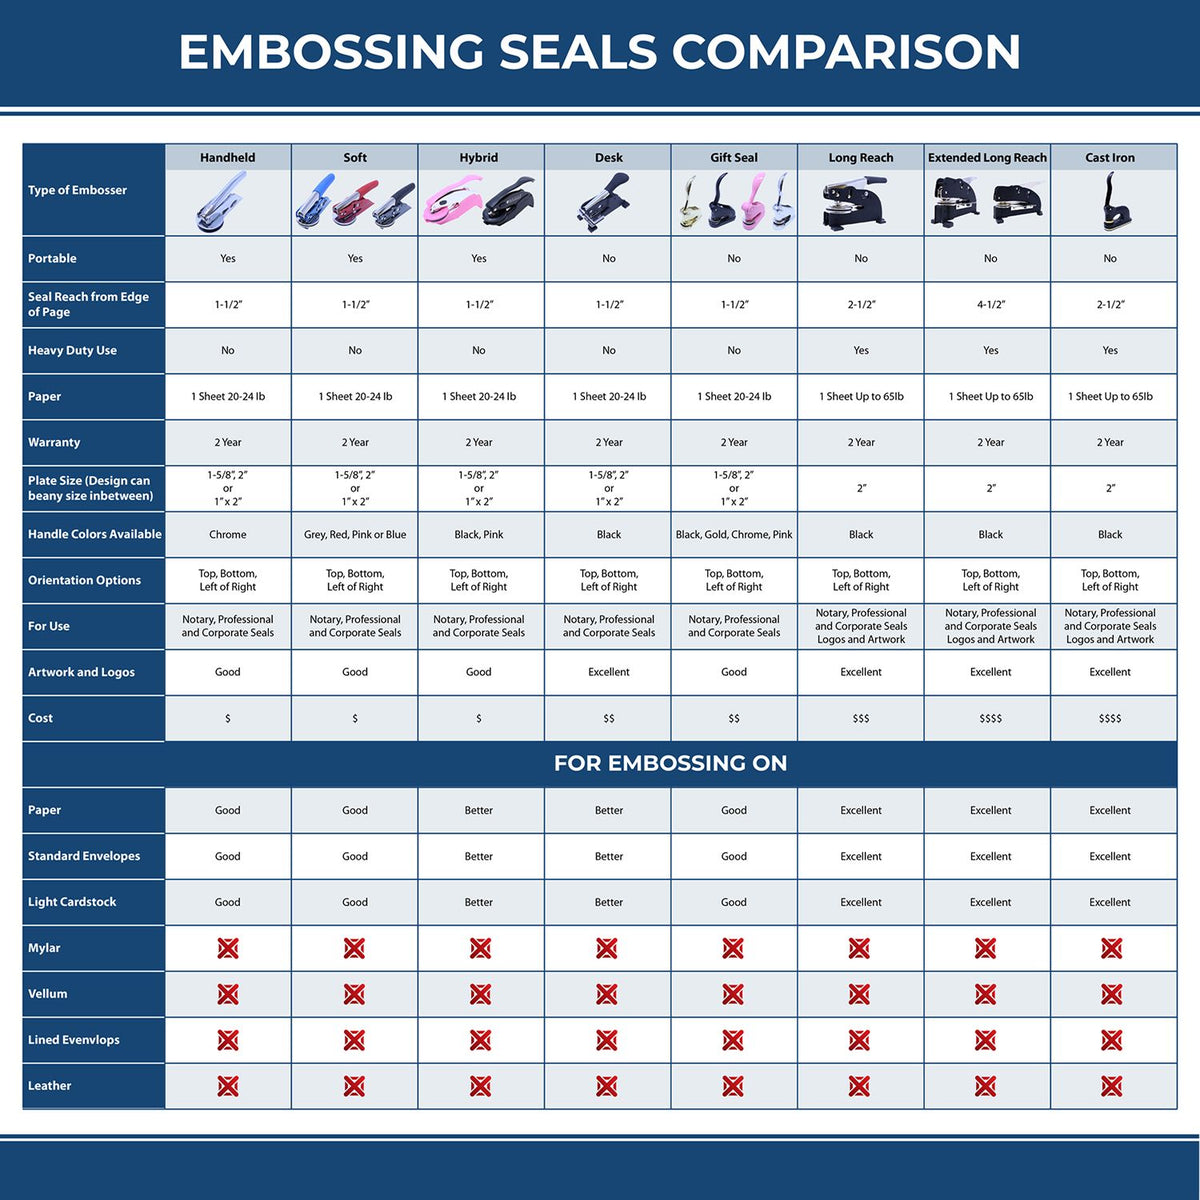 A comparison chart for the different types of mount models available for the State of North Dakota Soft Land Surveyor Embossing Seal.